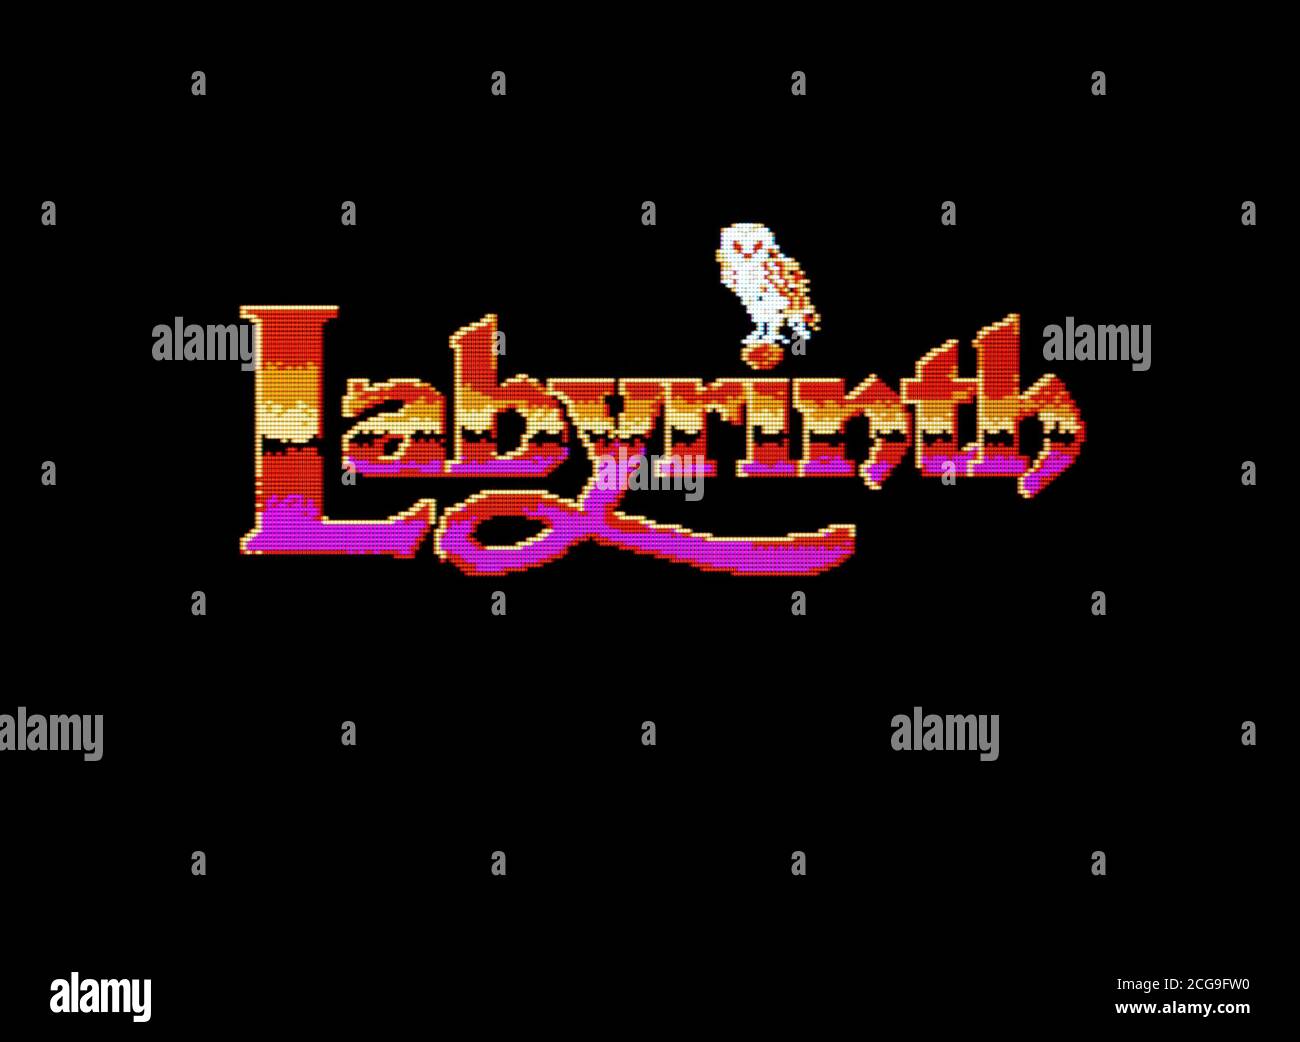 Labyrinth - Nintendo Entertainment System - NES Videogame - Editorial use only Stock Photo